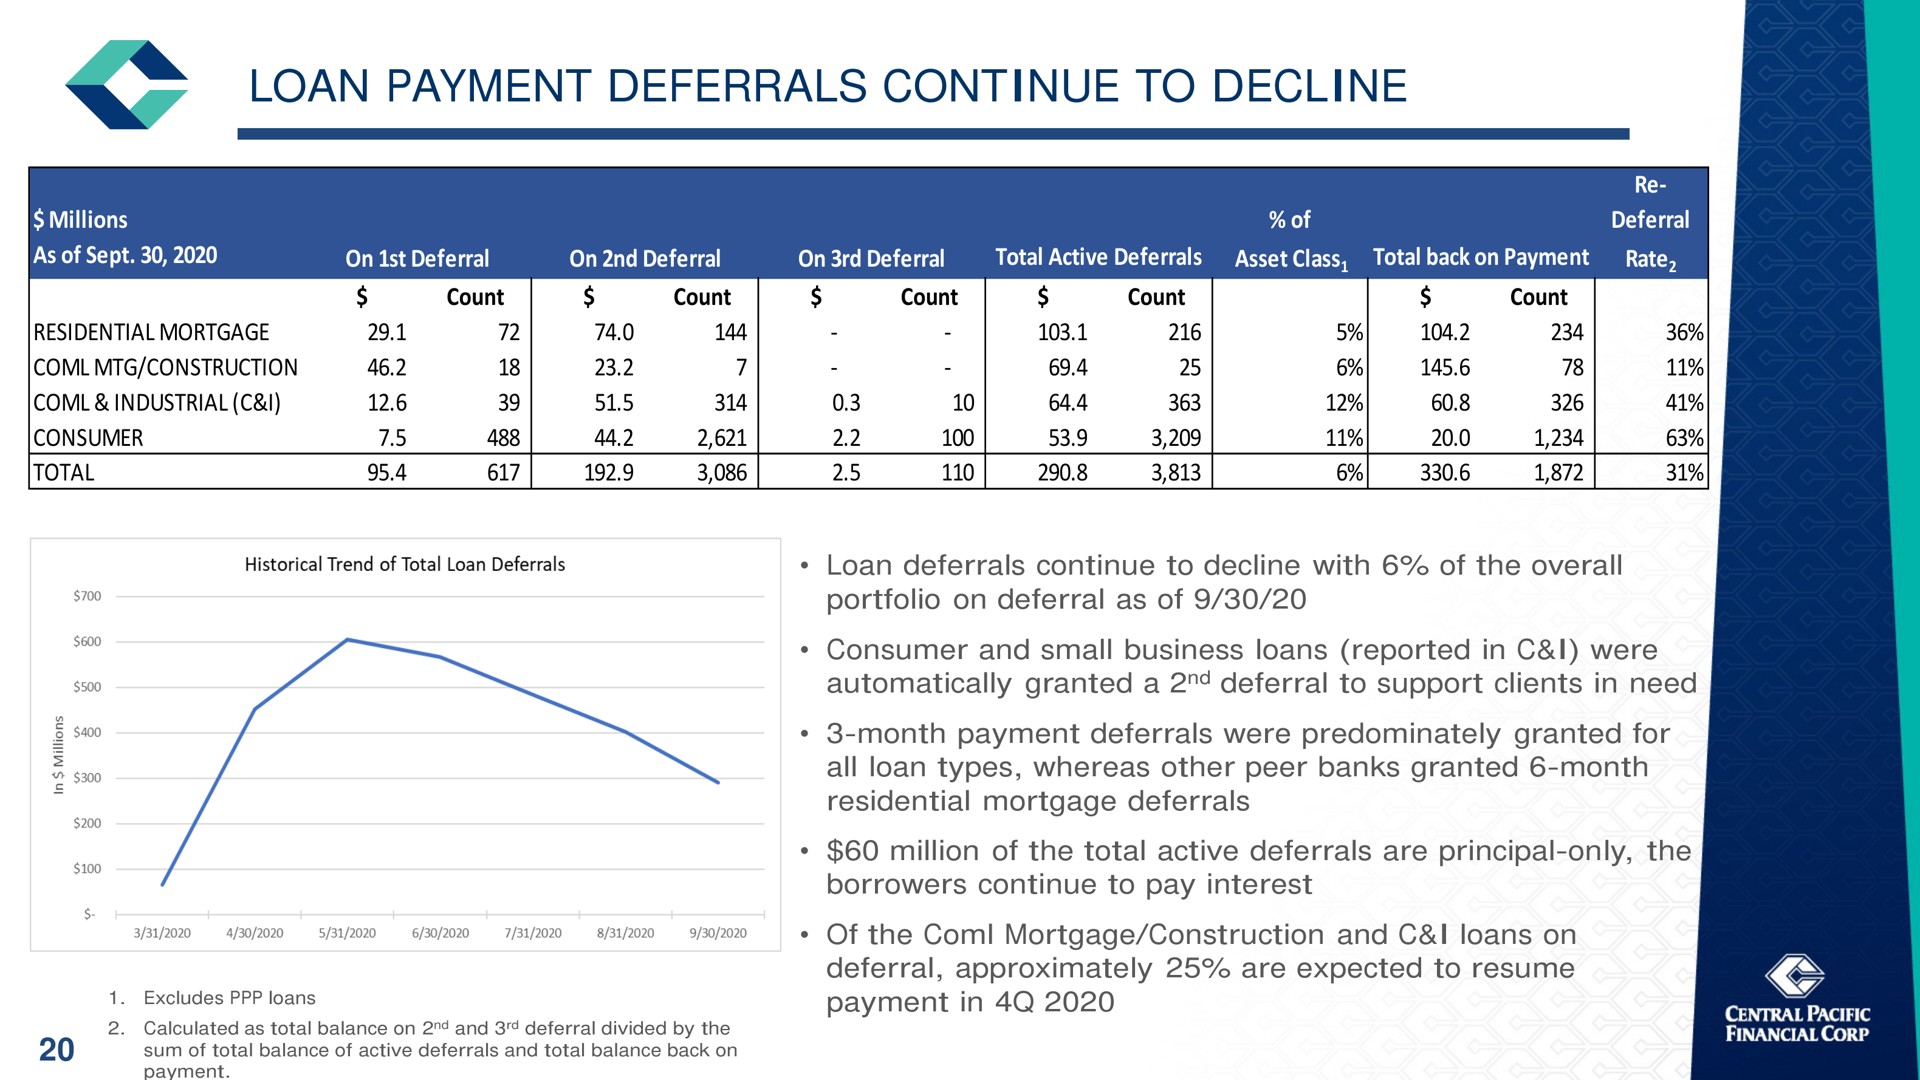 loan payment deferrals continue to decline | Central Pacific Financial